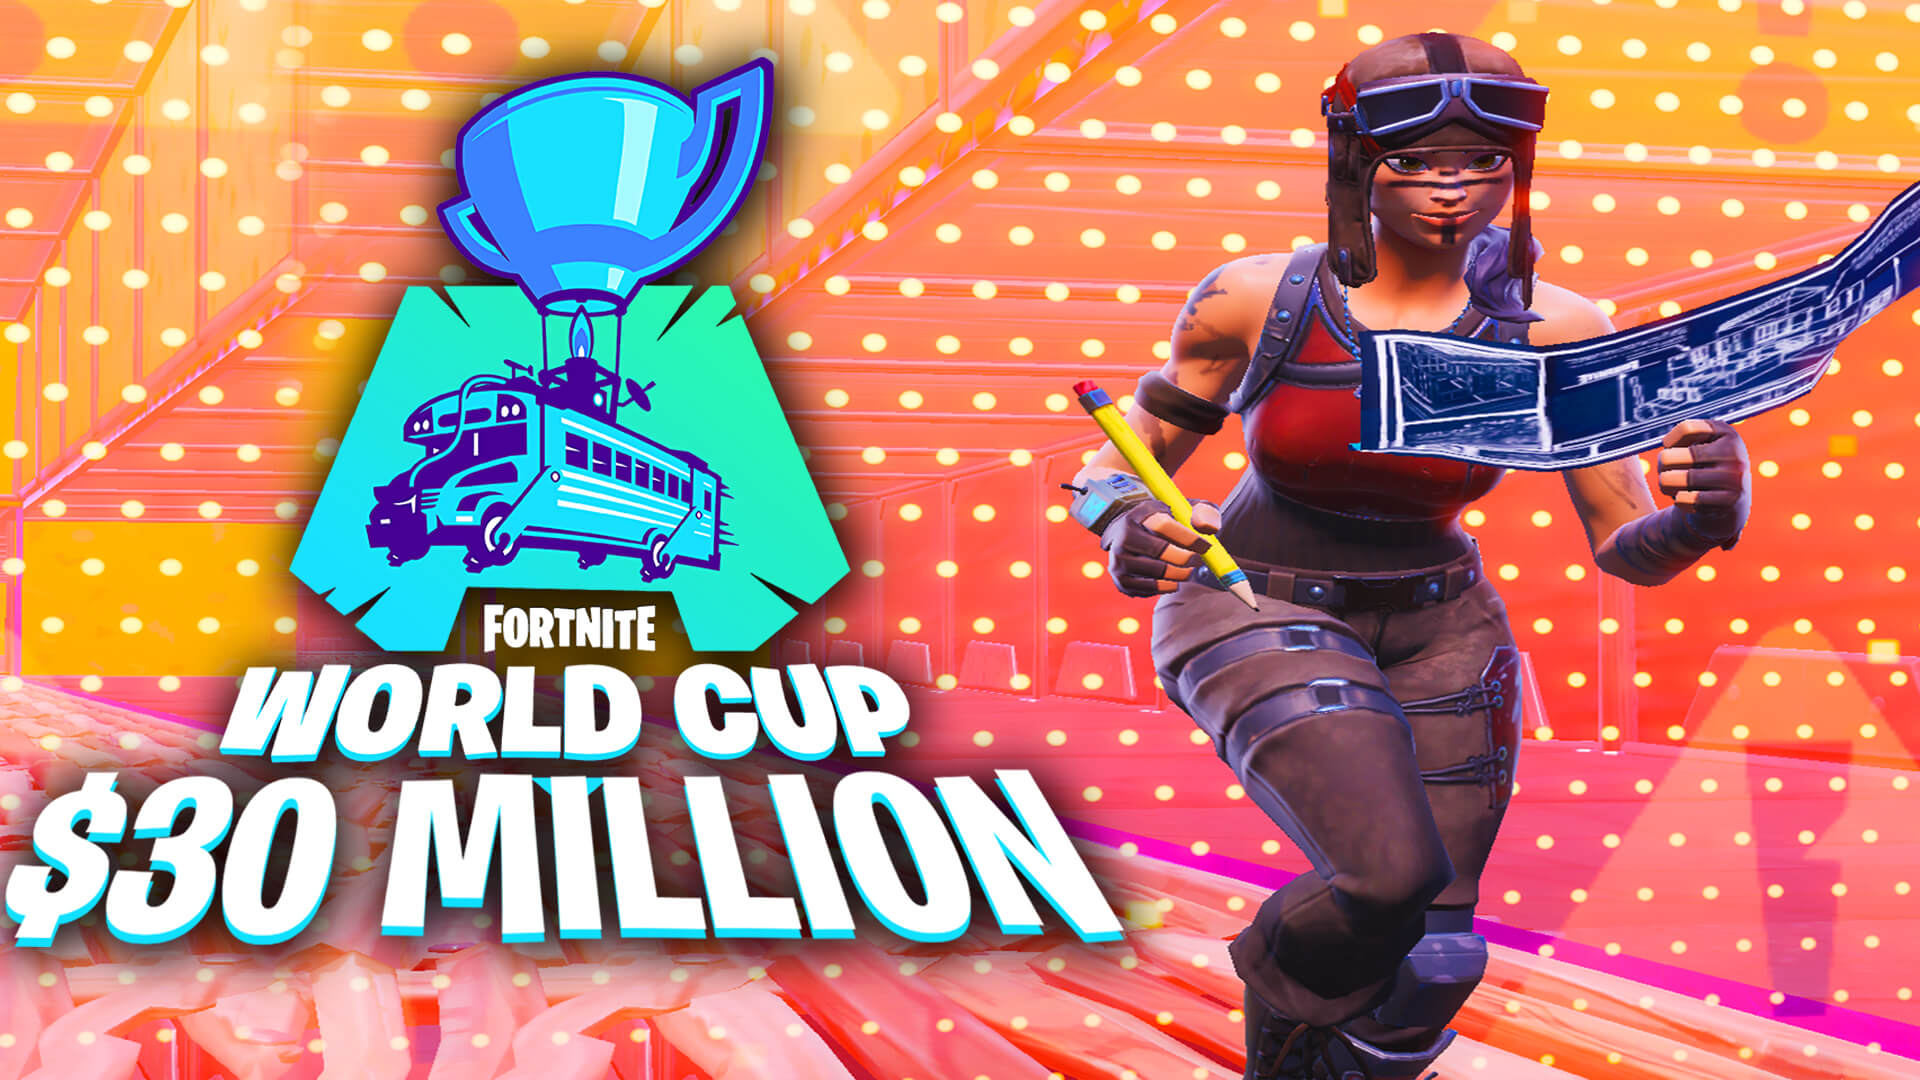 FORTNITE WORLD CUP EDIT COURSE